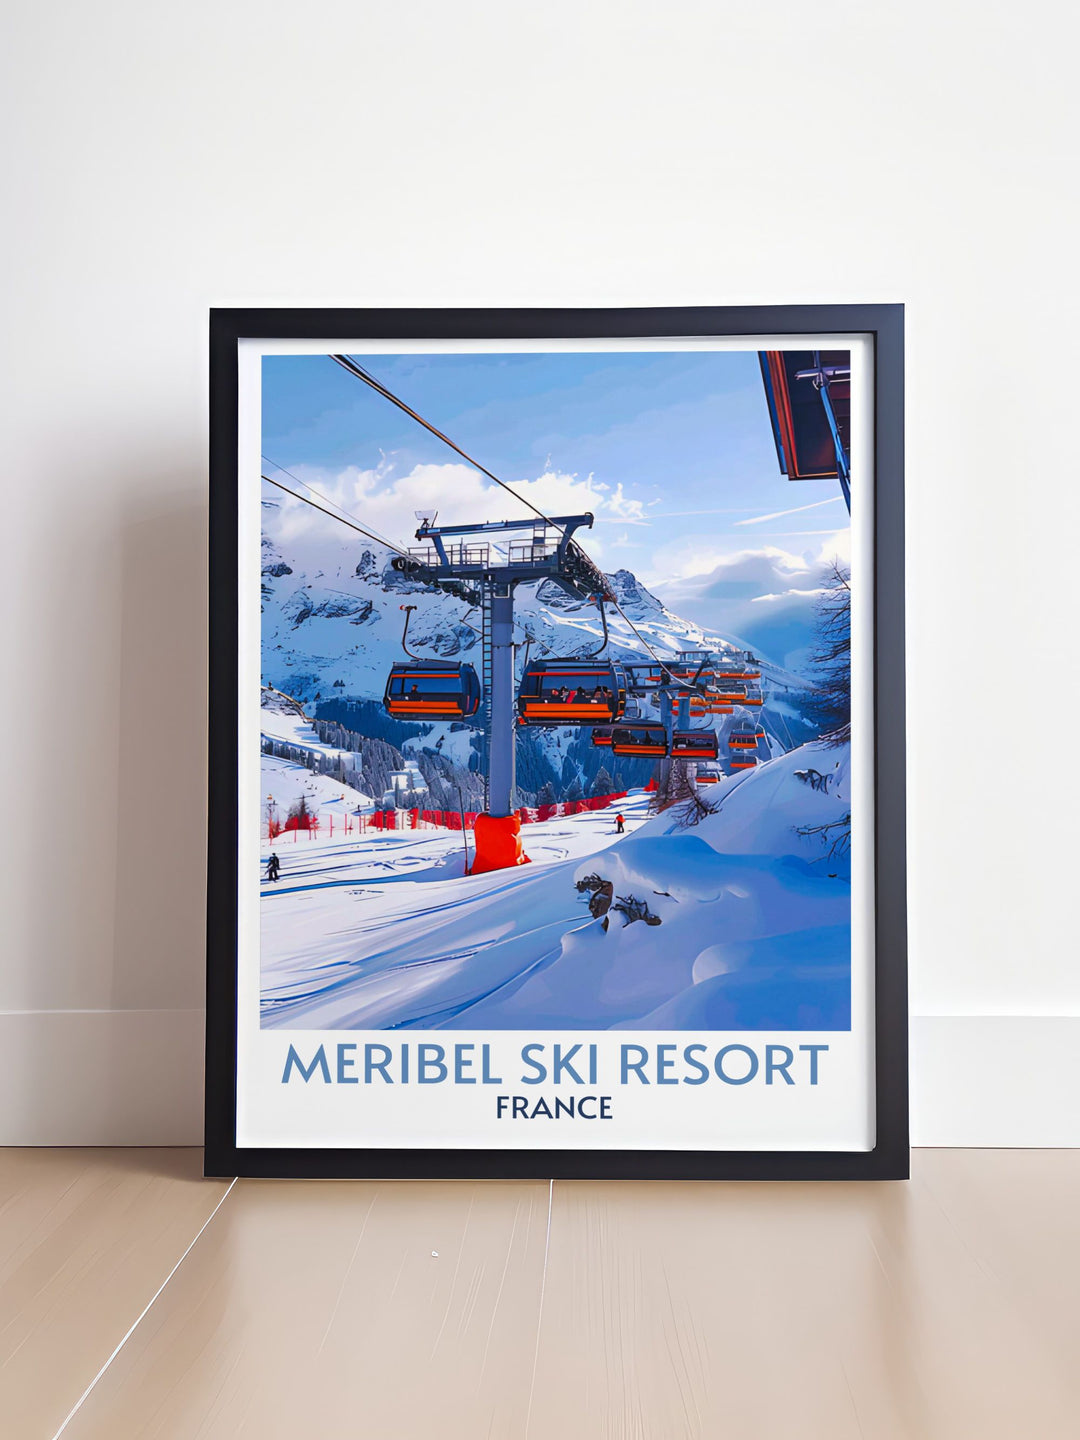 Home decor featuring ski lifts at Meribel, with detailed depictions of cable cars ascending frosty mountain ridges, perfect for bringing the ski lodge vibe indoors.